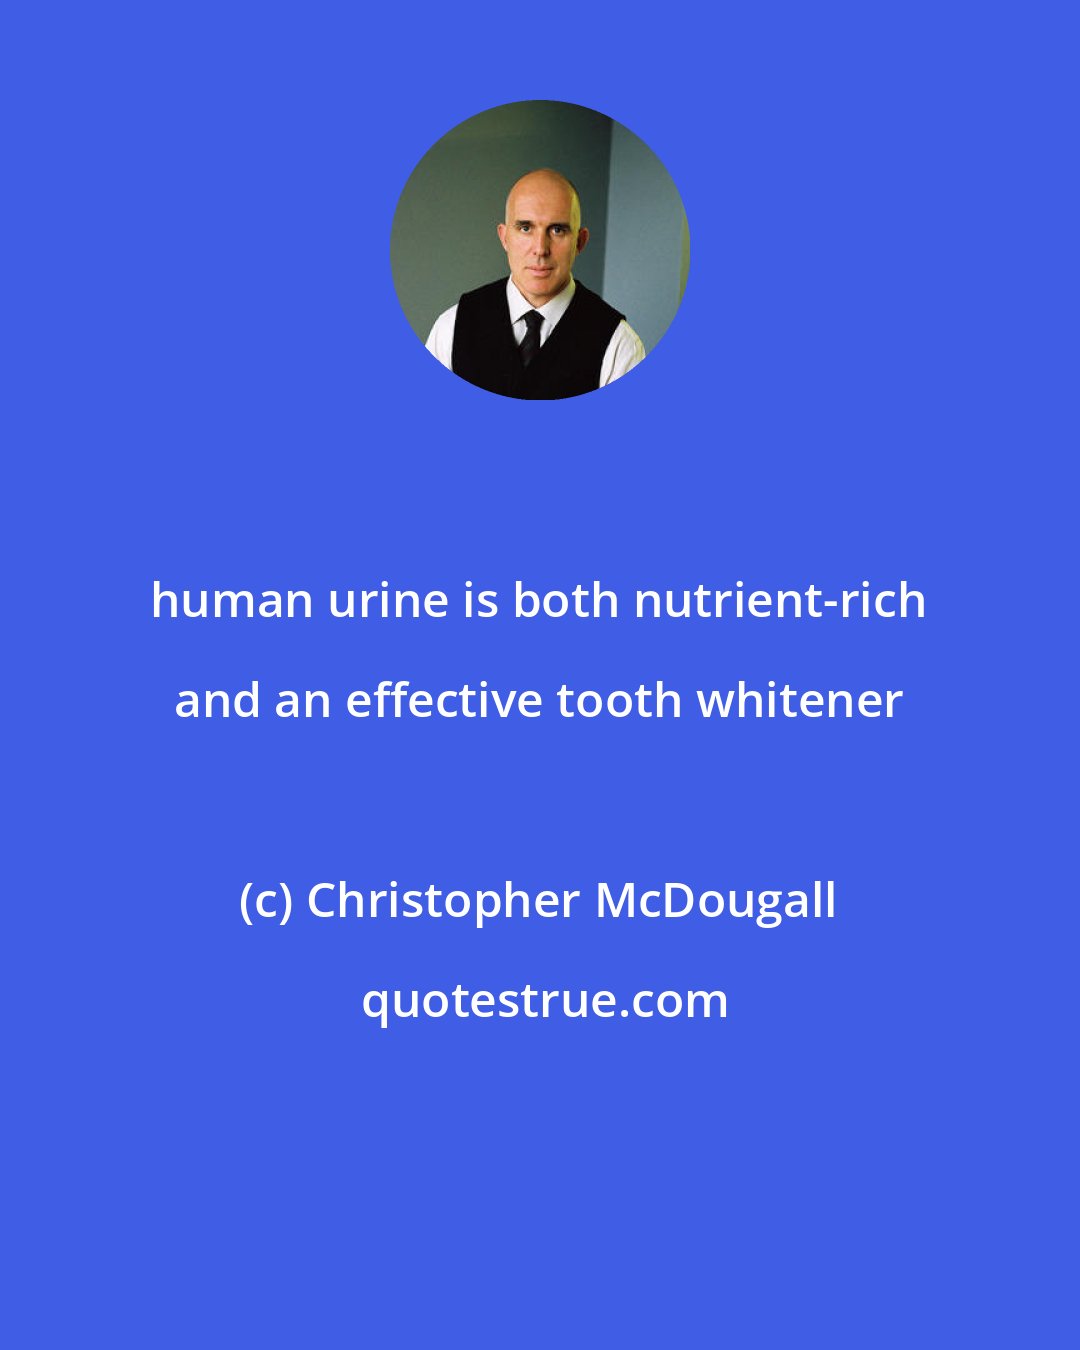 Christopher McDougall: human urine is both nutrient-rich and an effective tooth whitener